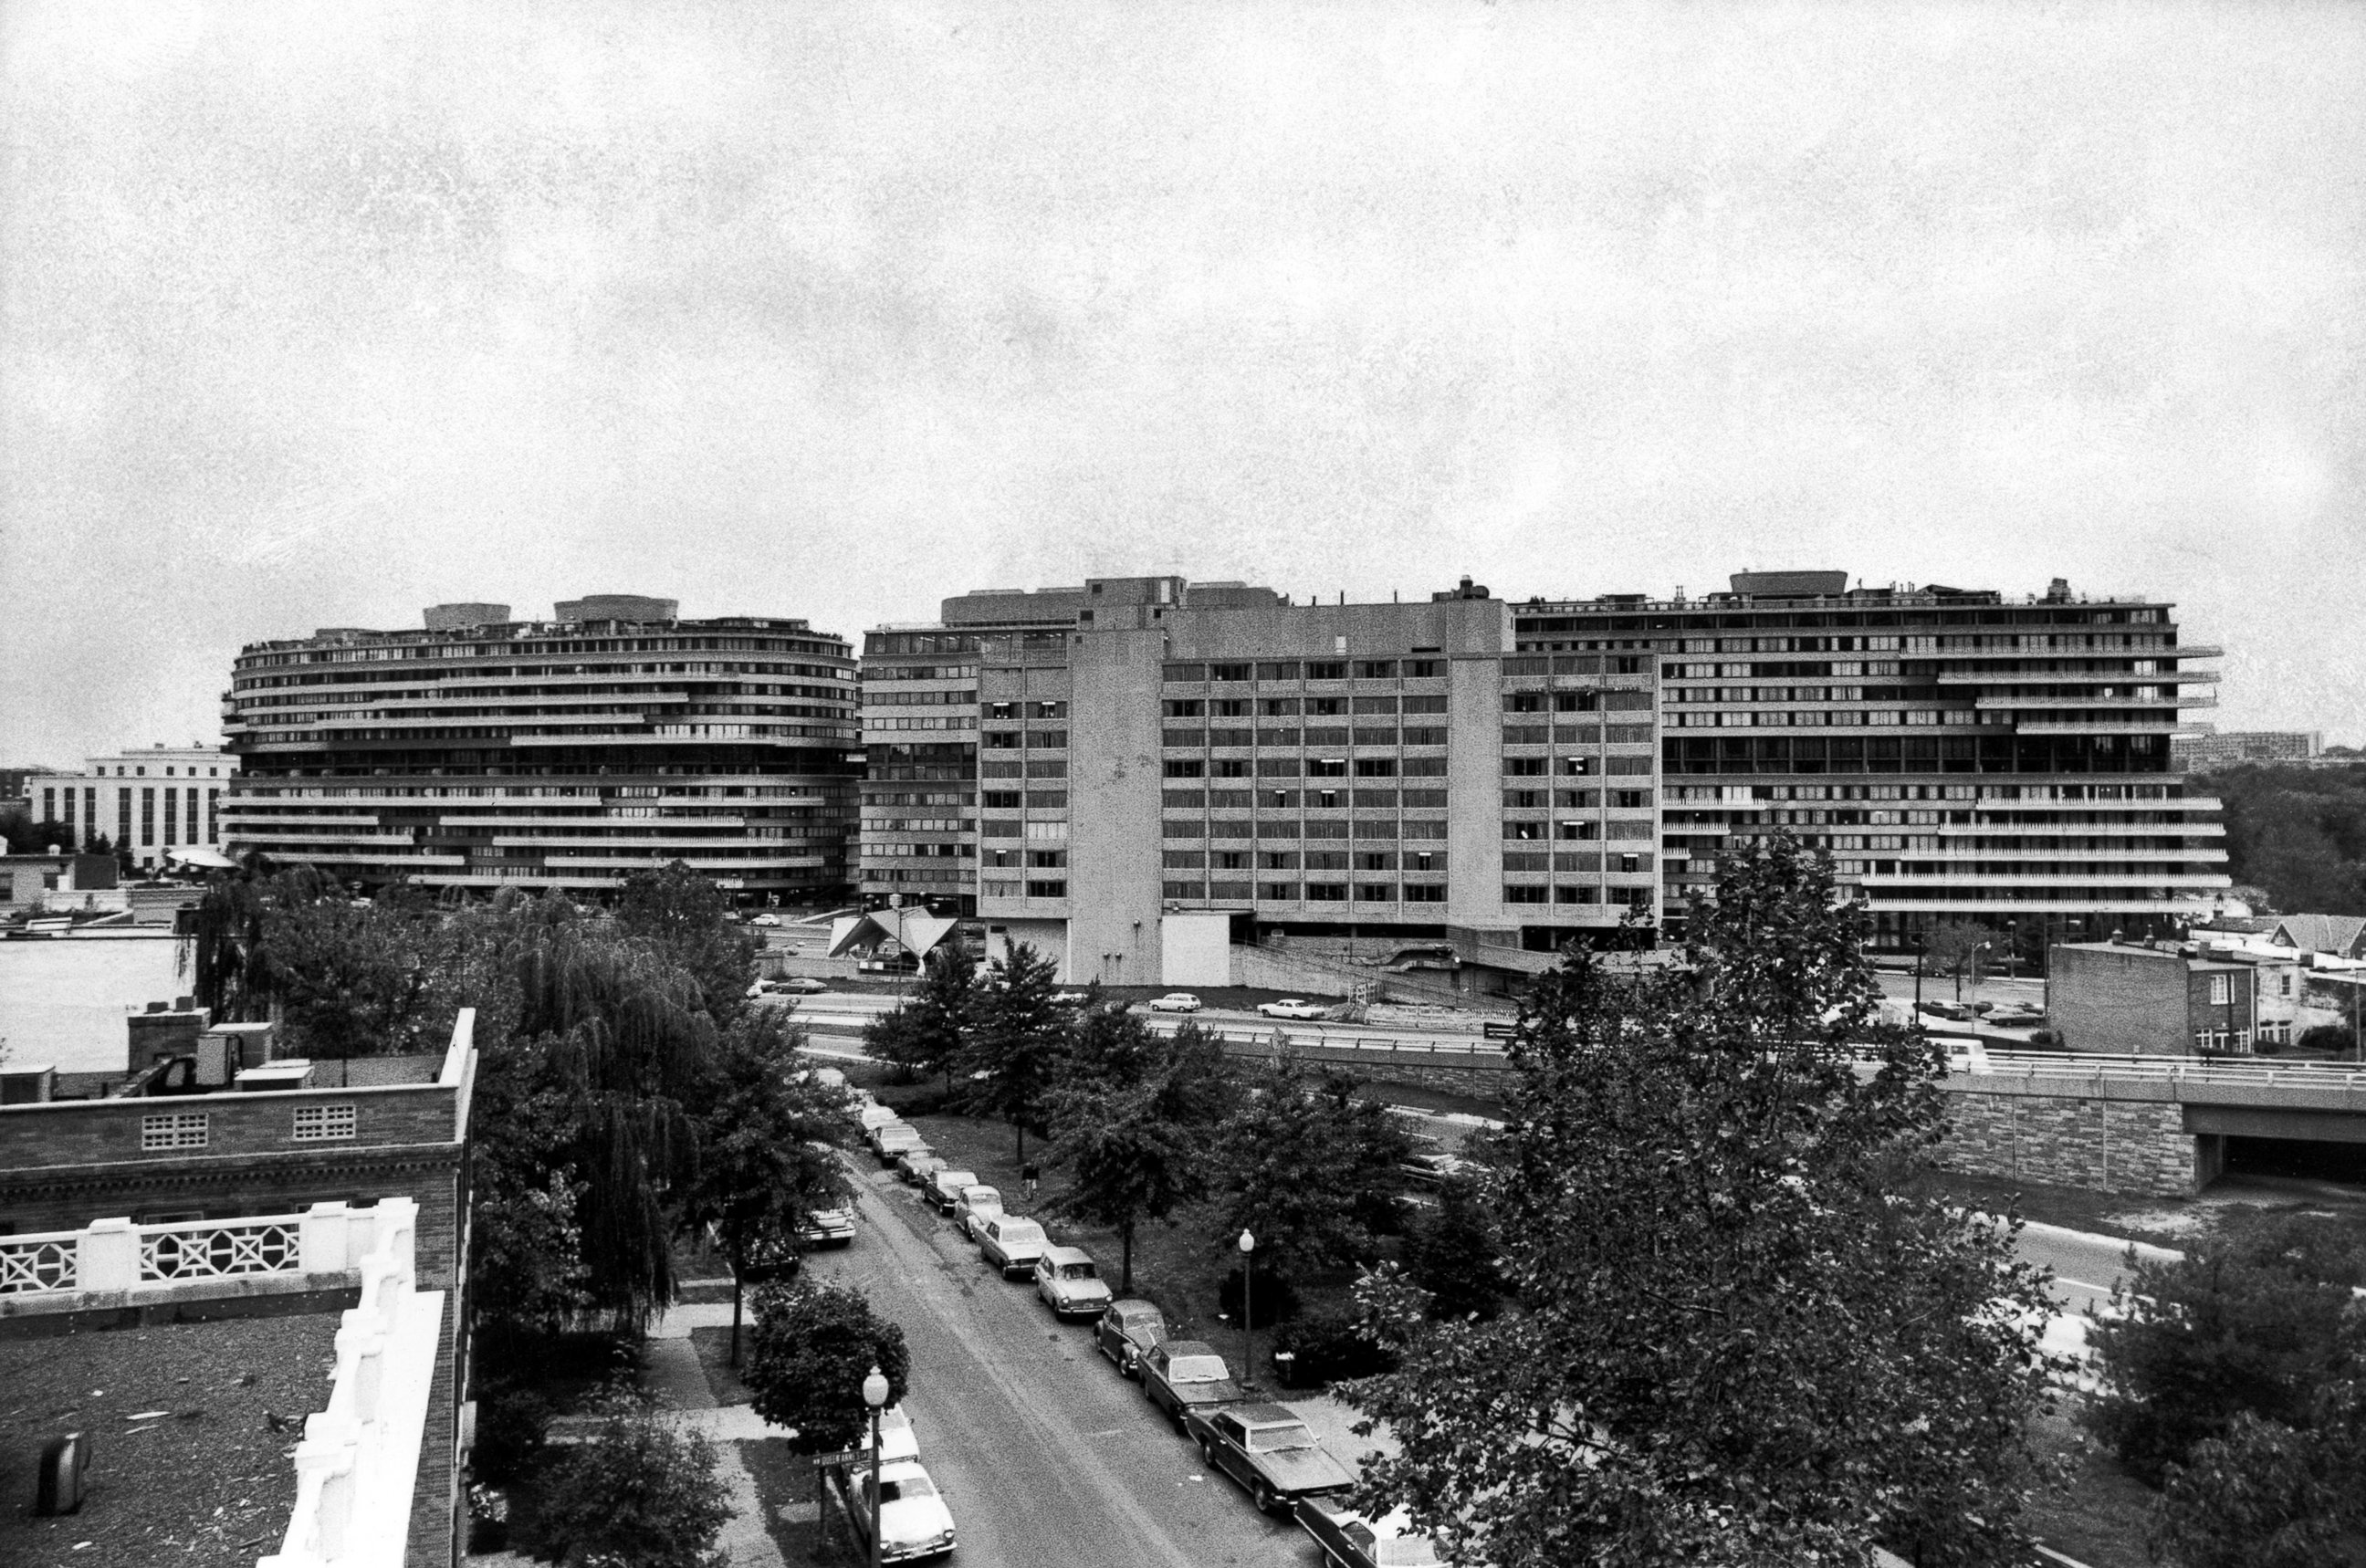 PHOTO: The Watergate apartment & hotel complex, Oct. 18, 1972 (rear of the Howard Johnson motel/restaurant visible in the center). 